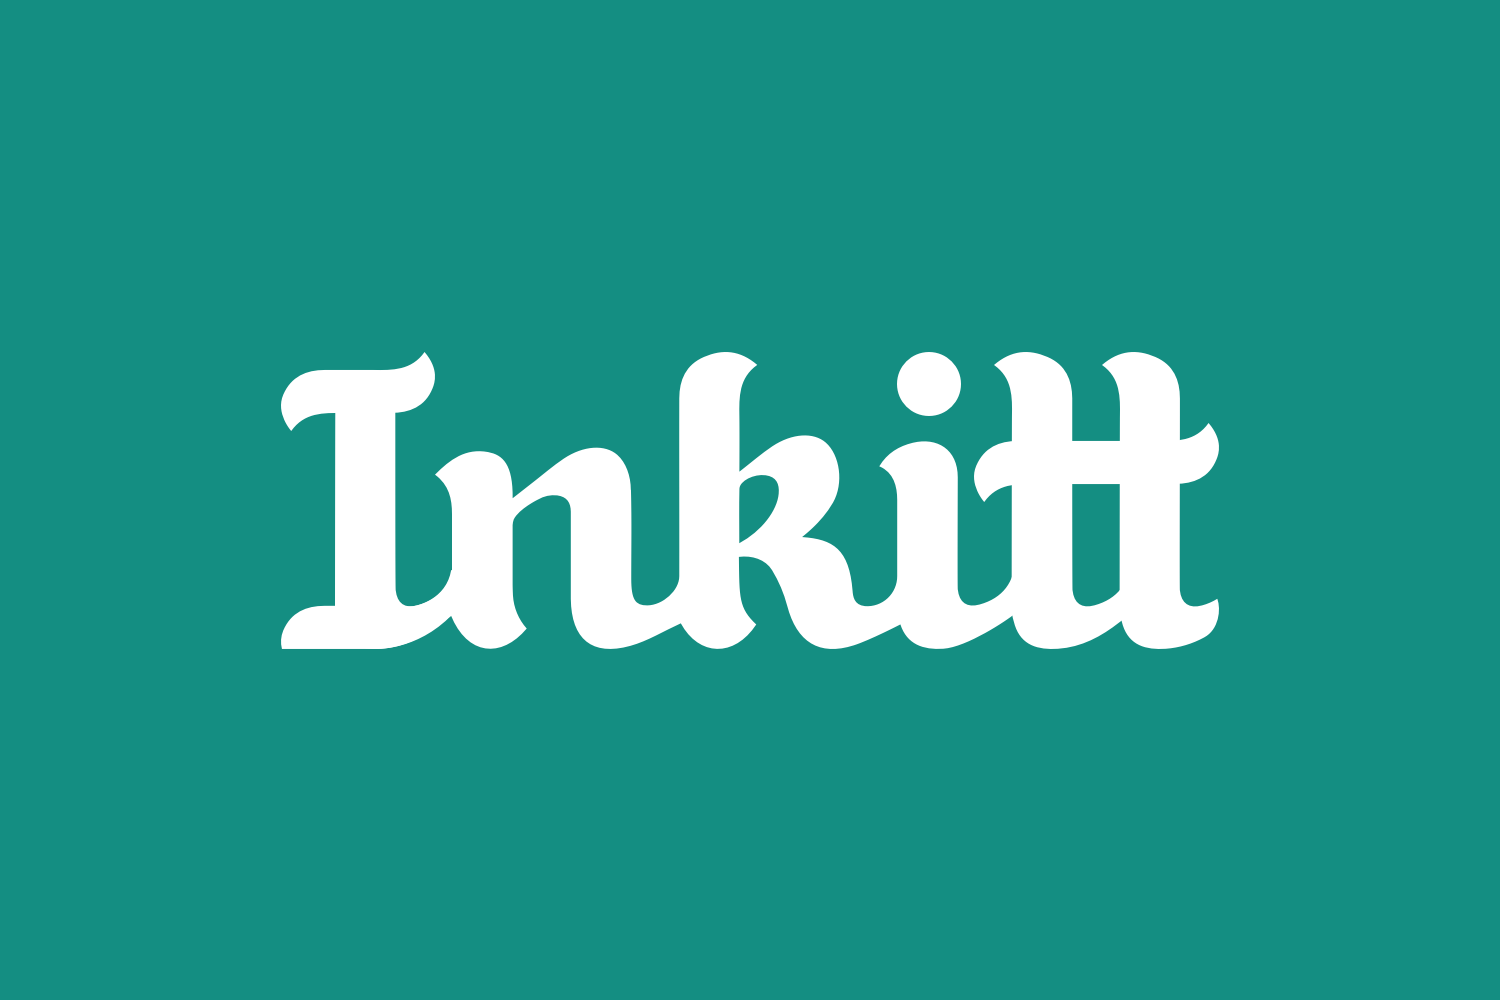 Working with Inkitt to write the next chapter